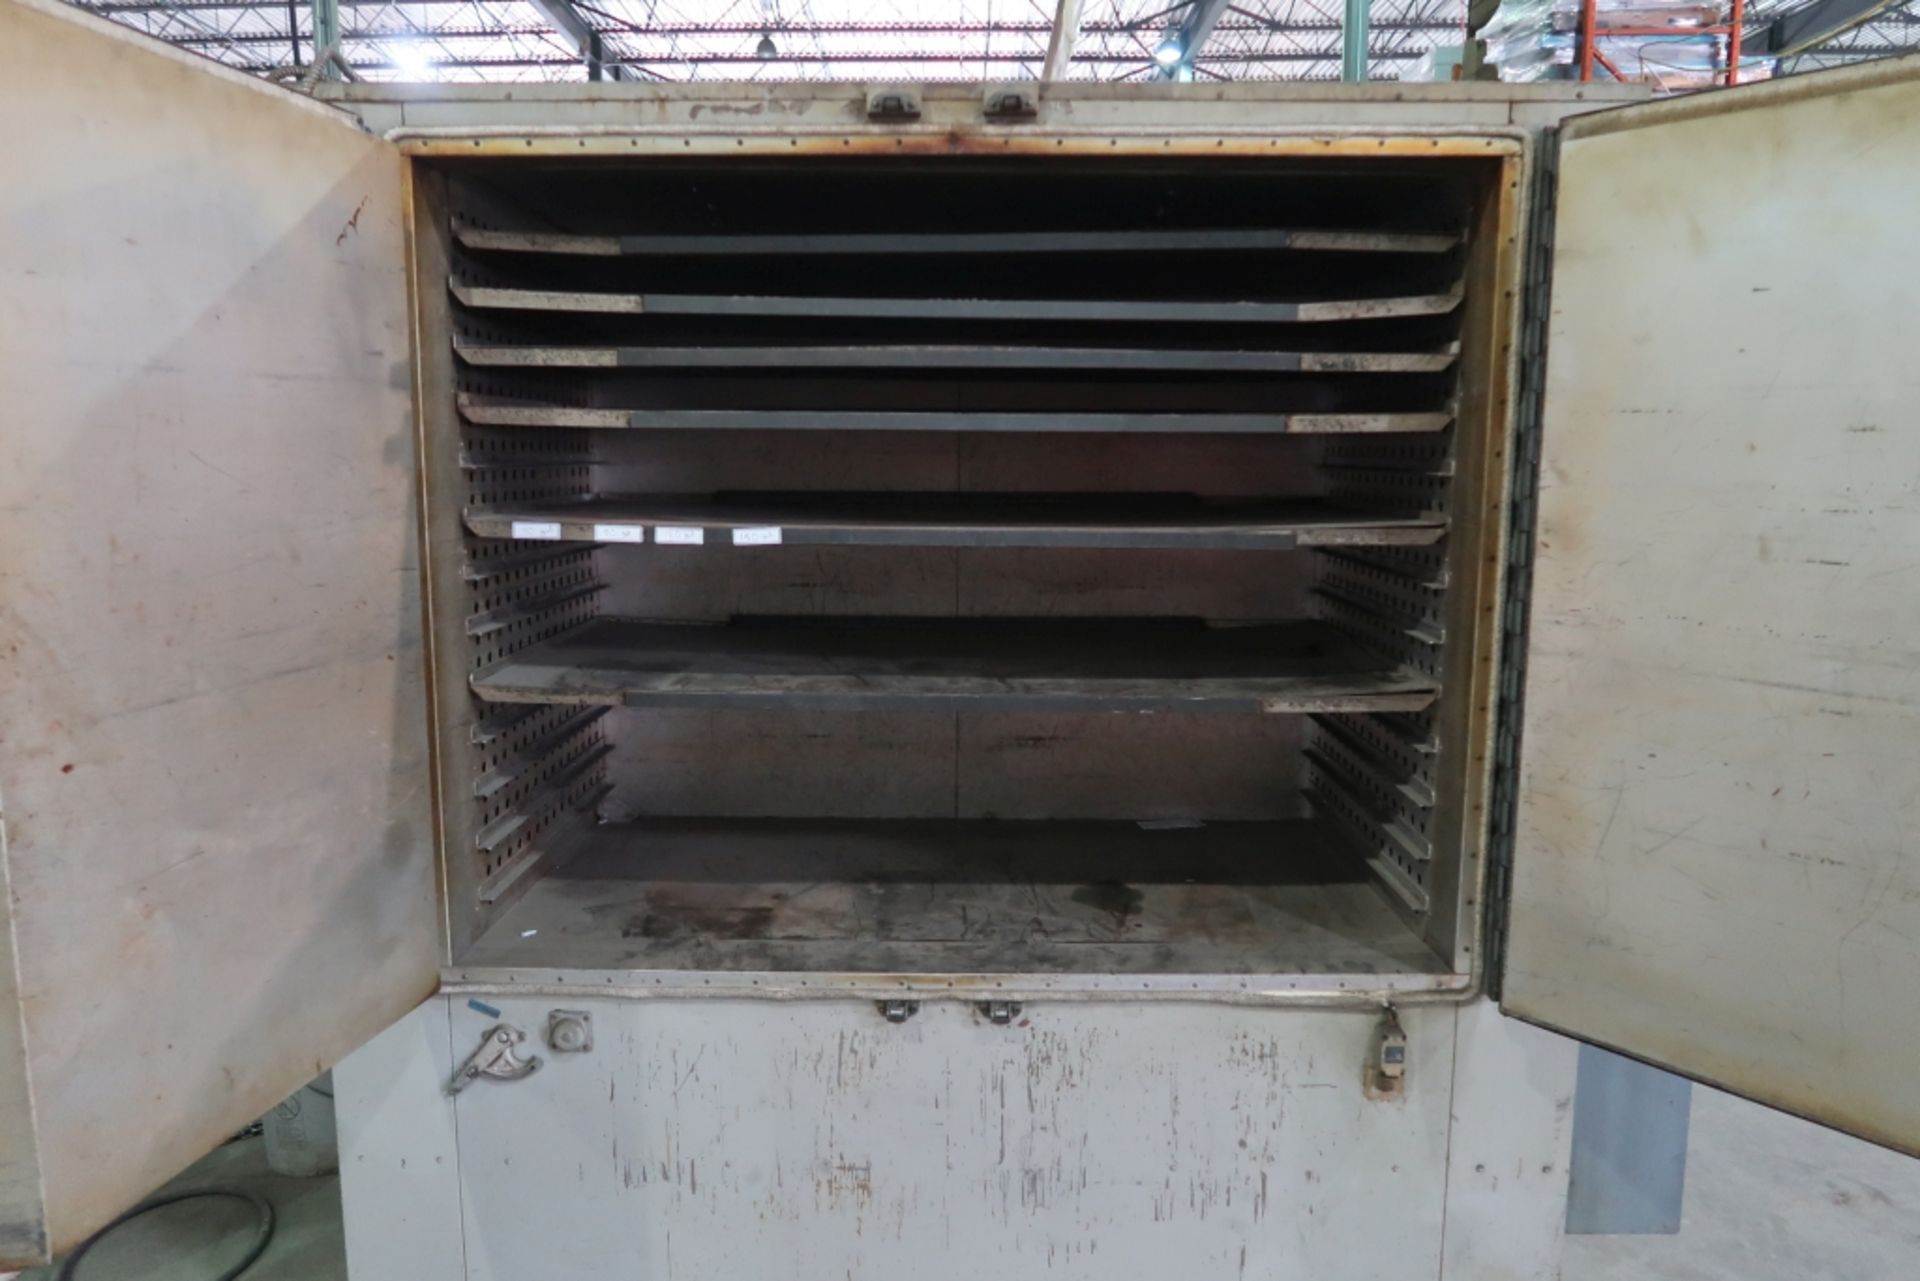 HOT PACK HEAT TREATING OVEN, 62''W X 48''H X 30''D, 575V 3PH - Image 2 of 5